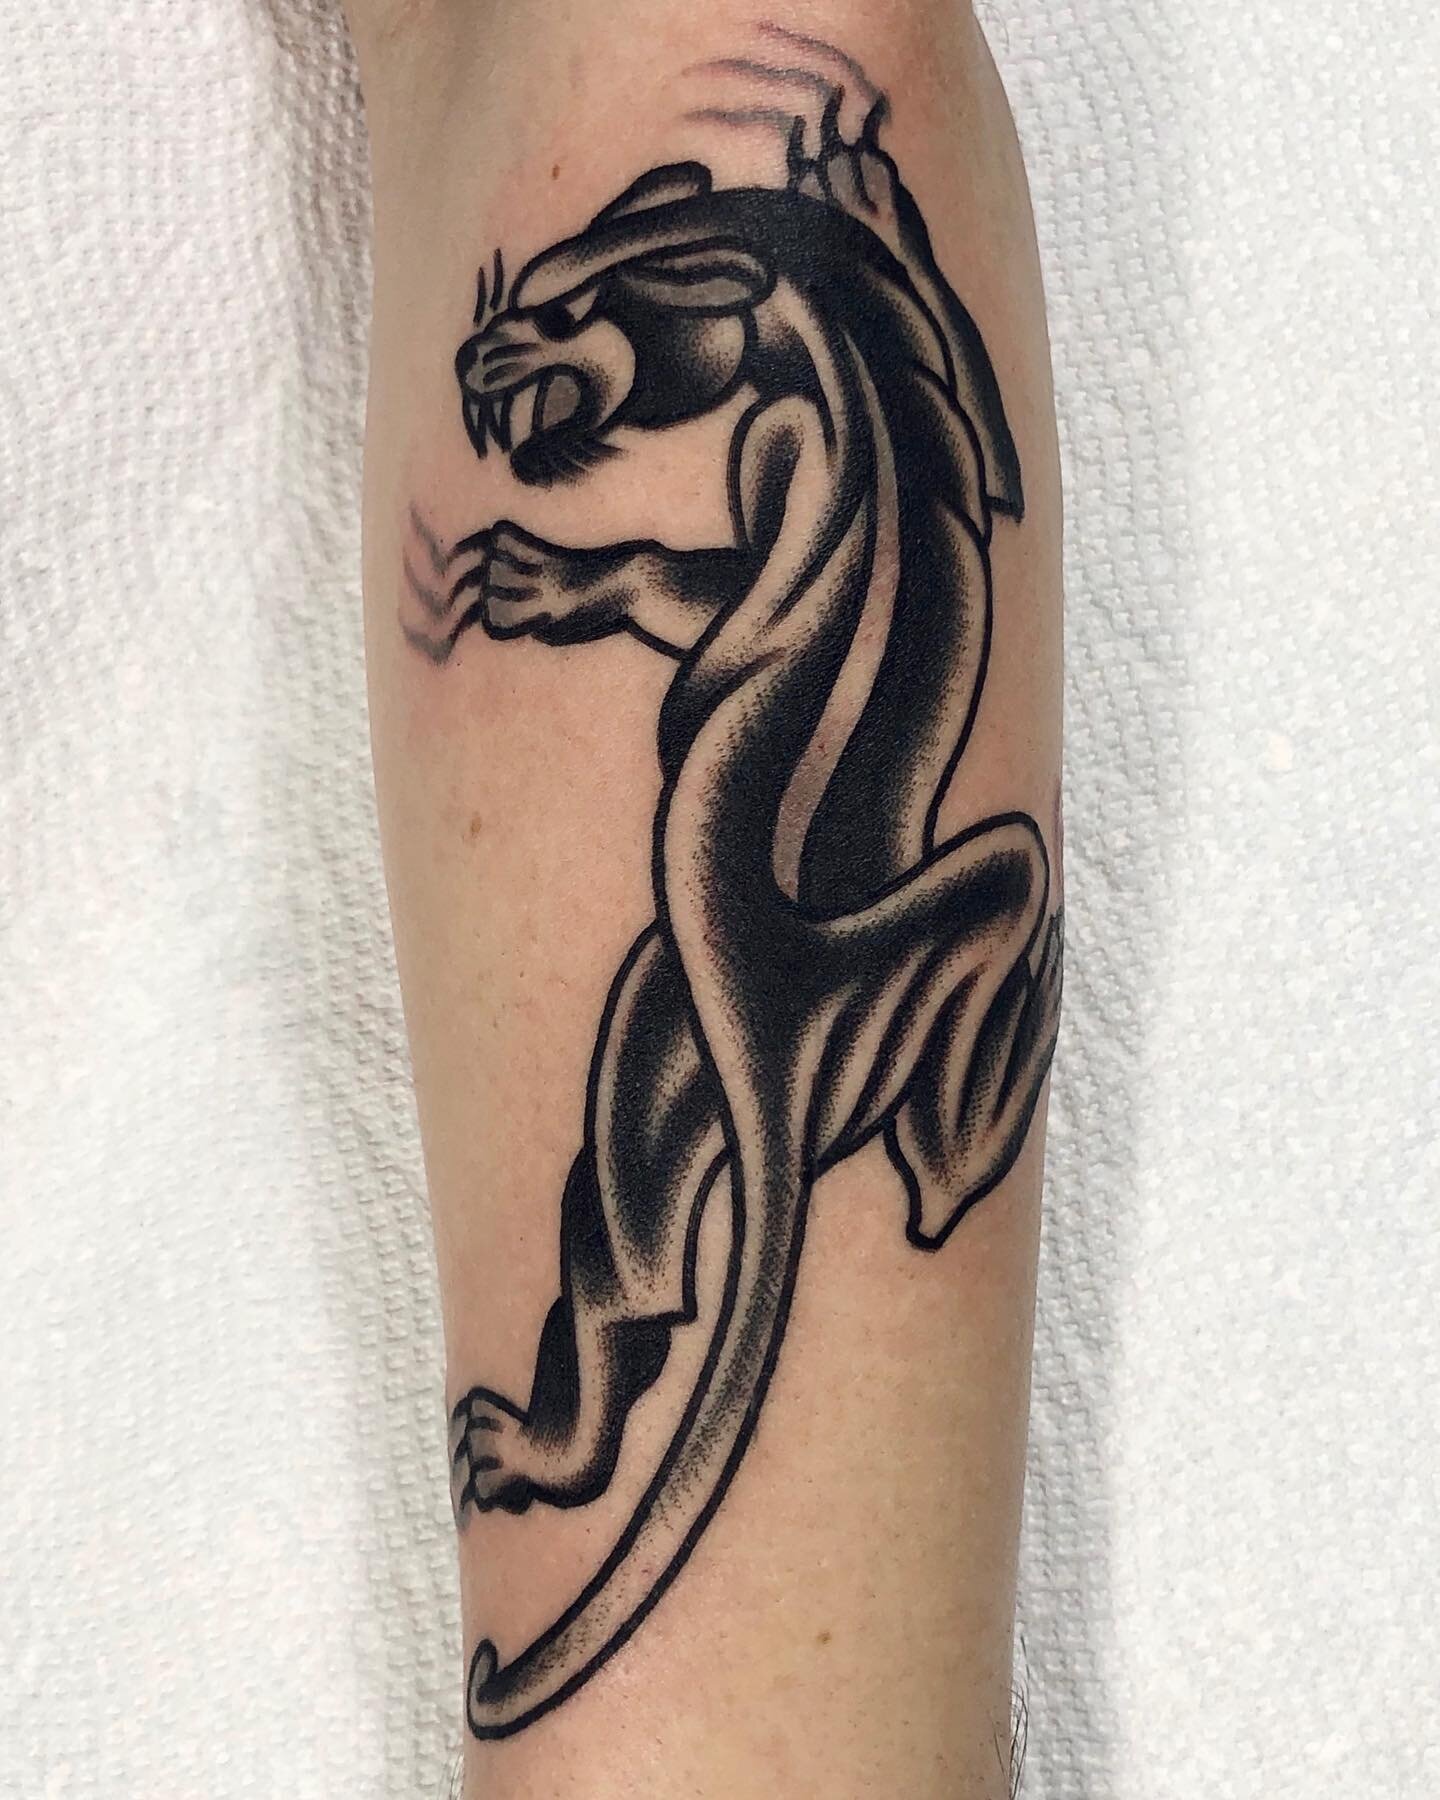 Panther for Pietro 
Obrigado mano 🙌
@victorytattooing 
.
.
.
.
.
.
.
.
.
.
.

#tattoo #tatuagem #traditionaltattoo #oldschooltattoo #ink #flashtattoo #vancouvertattoo #vancouvertattooartist #oldlines #oldworkers #tradworkers #tattooculture #tattooin